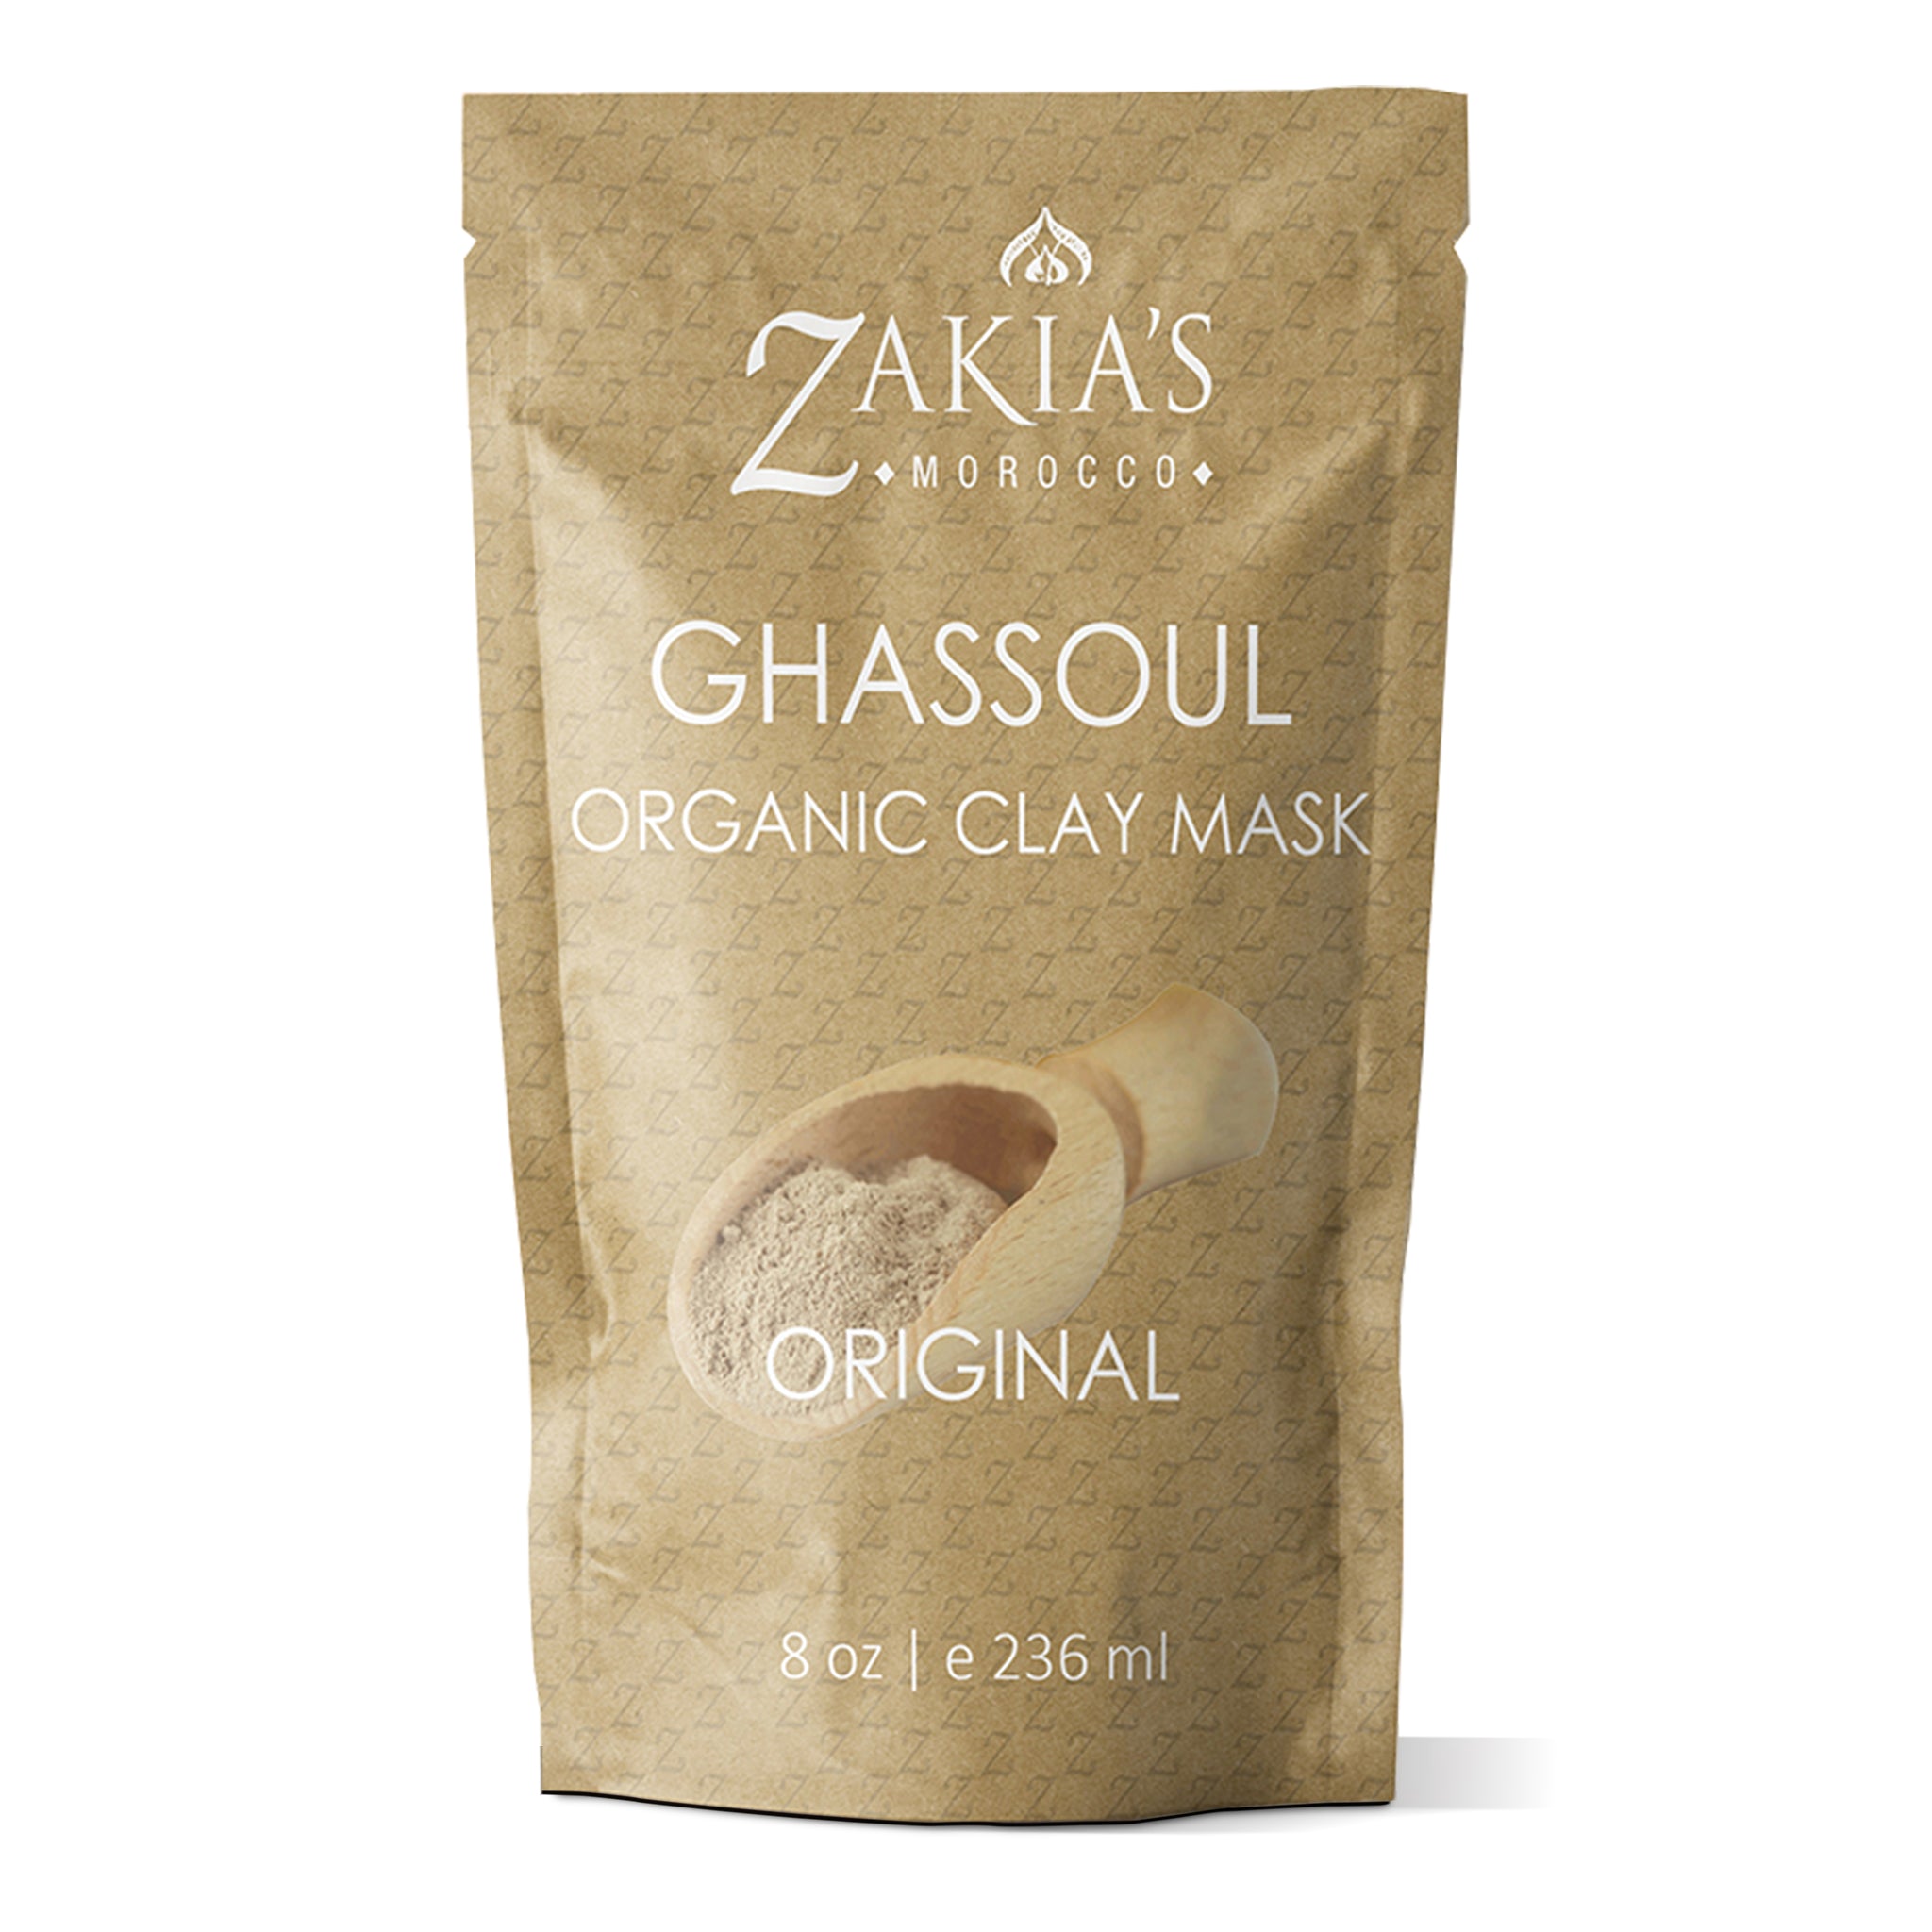 Moroccan Ghassoul Clay Face and Mask – Zakiasmorocco.com